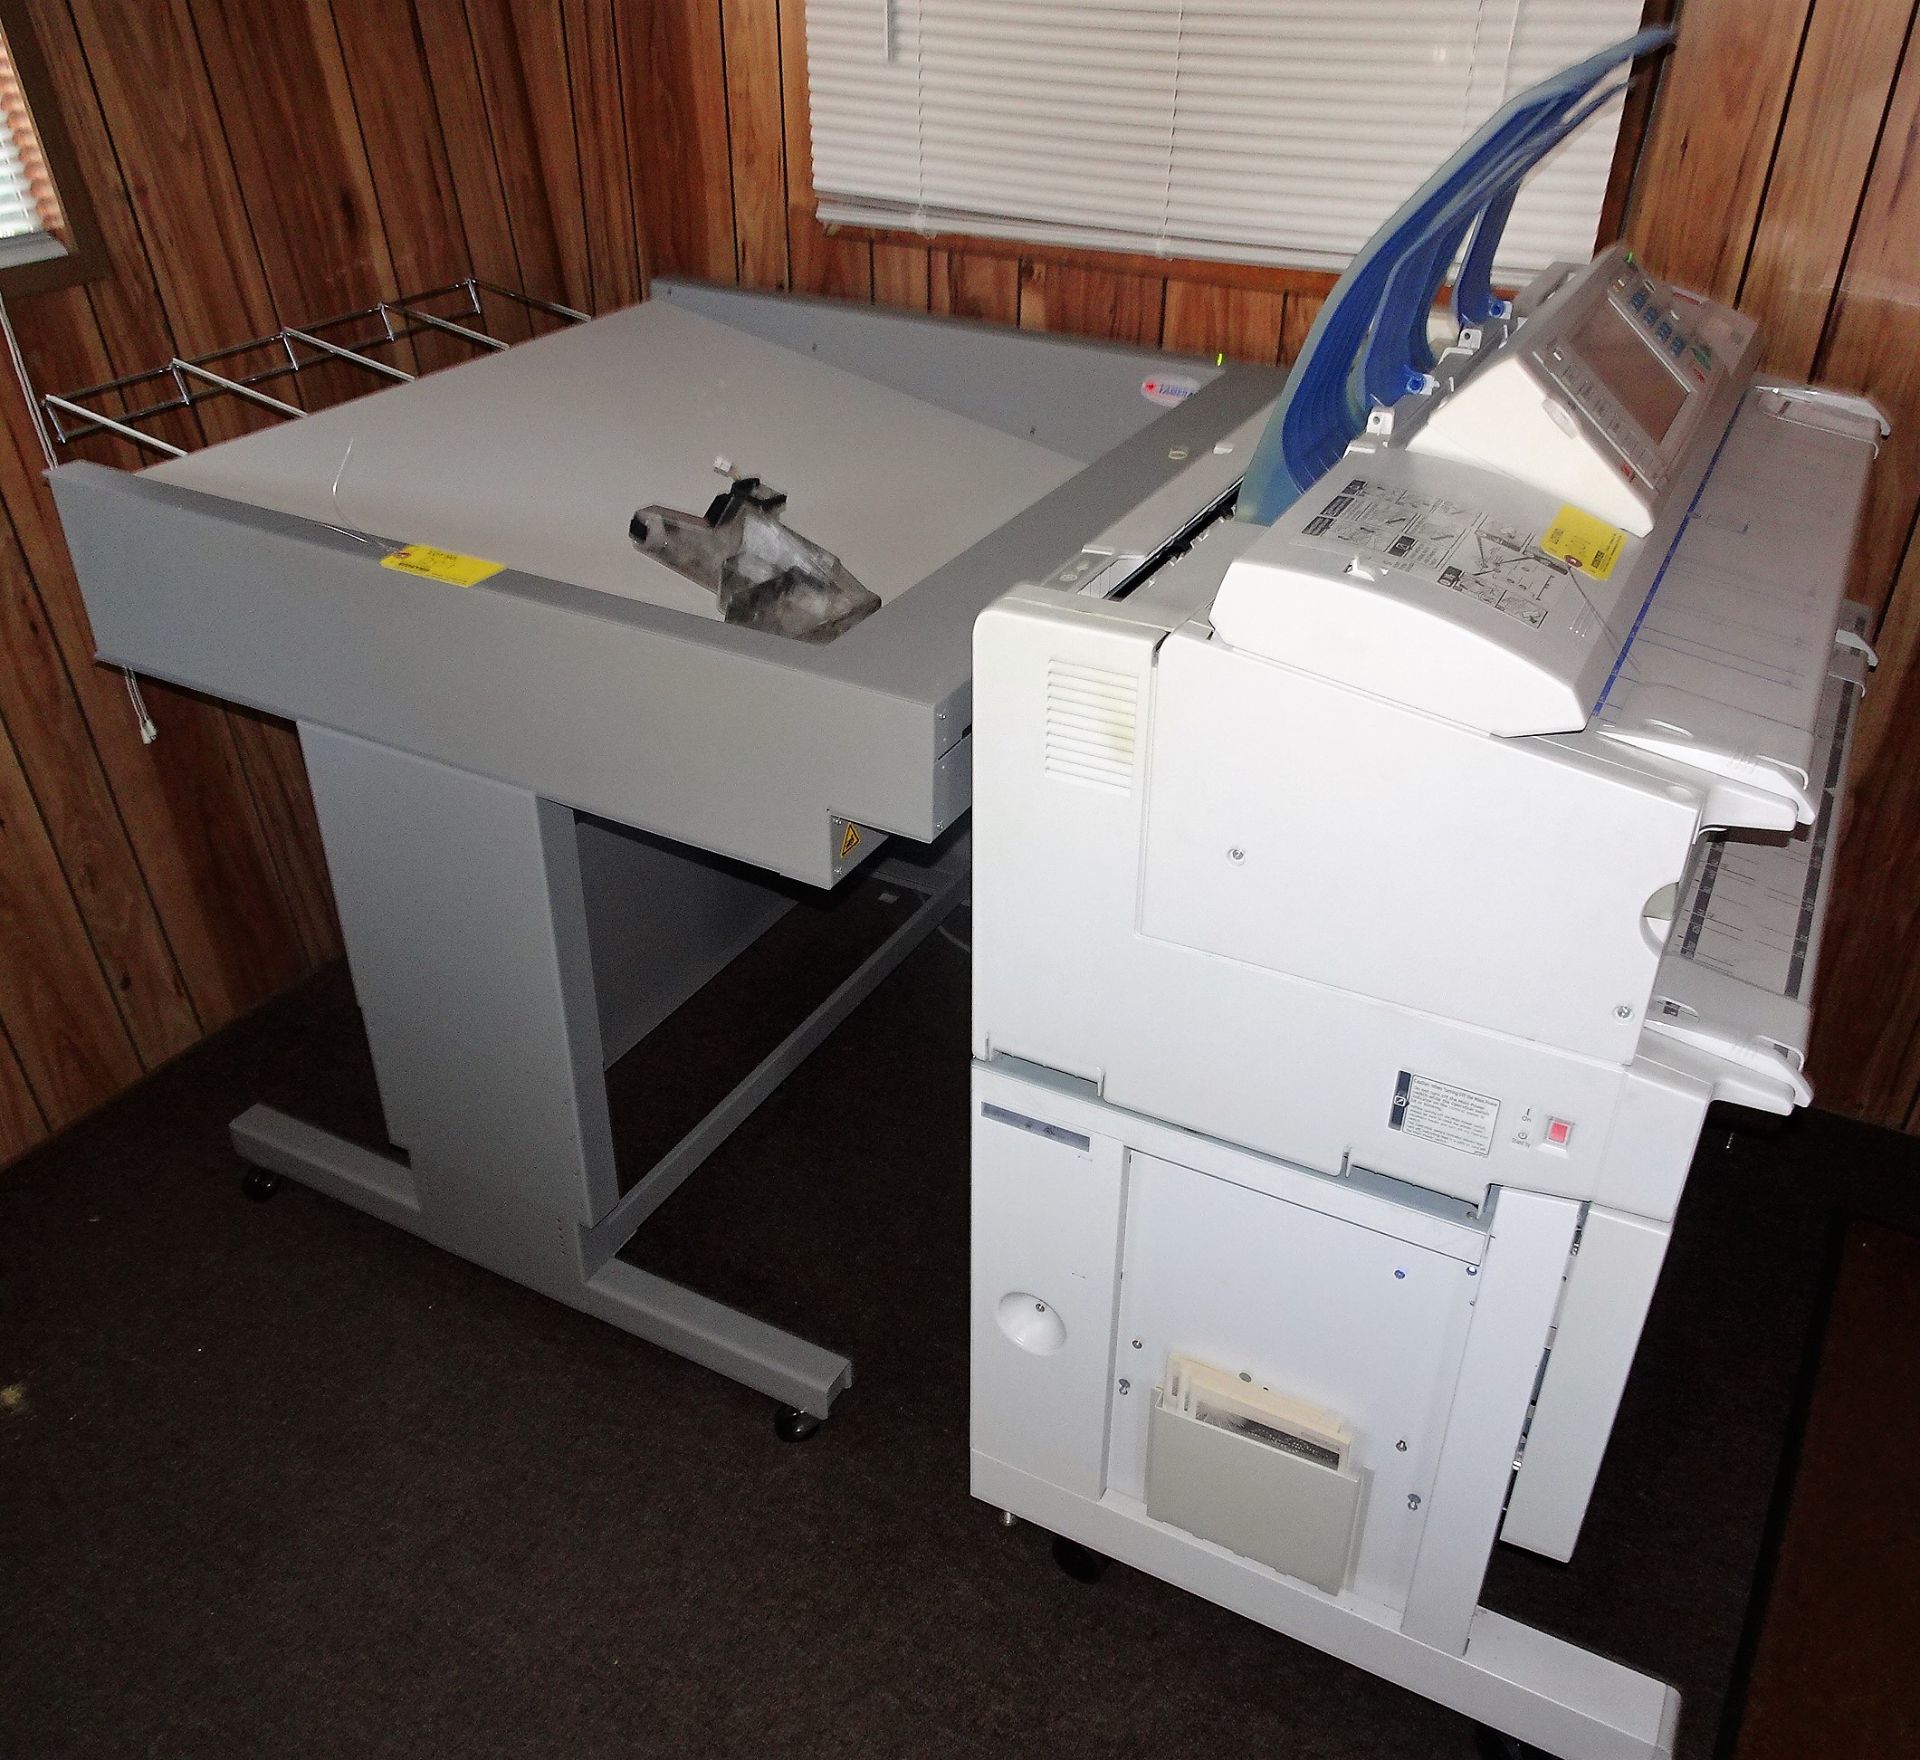 Ricoh Mdl. AFICIO MP W3600 36" Large Format Plotter Printer, with Tameran Feeding Catch Tray and - Image 2 of 2